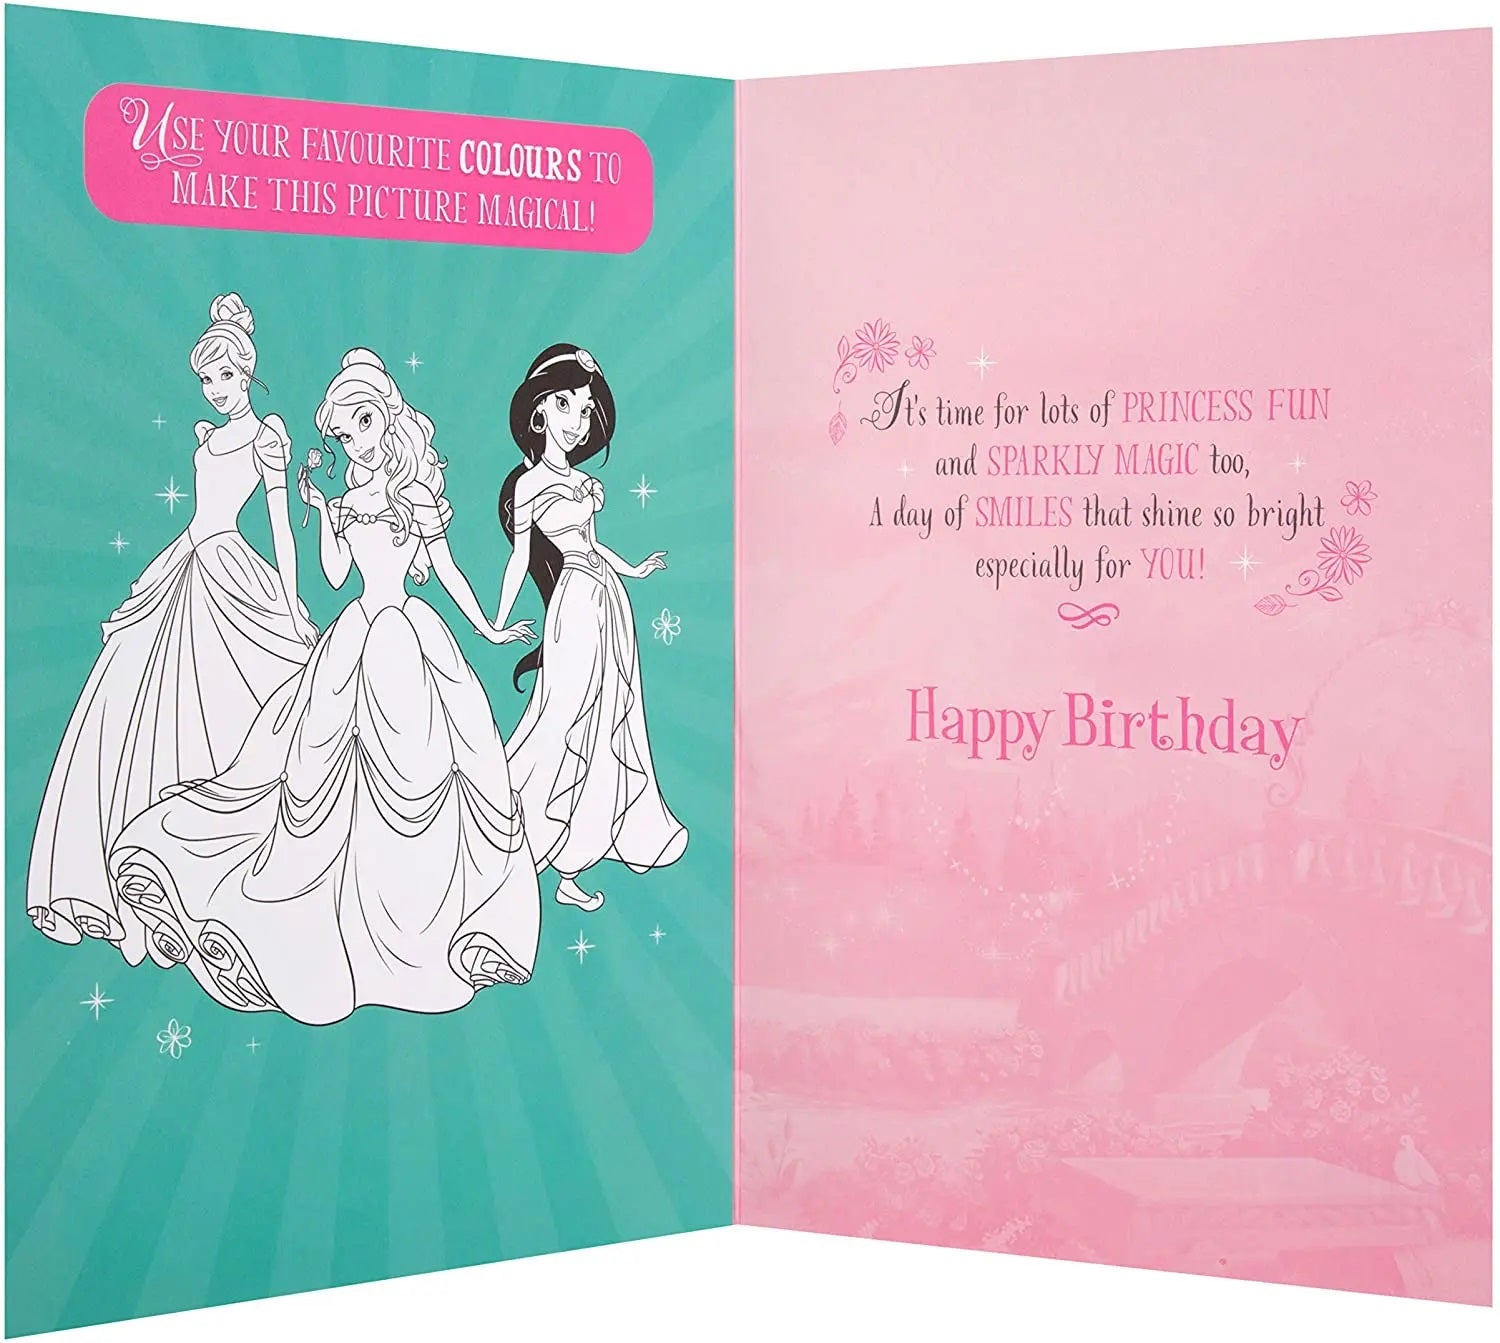 2nd Birthday Card - Colouring Fun with Disney Princesses